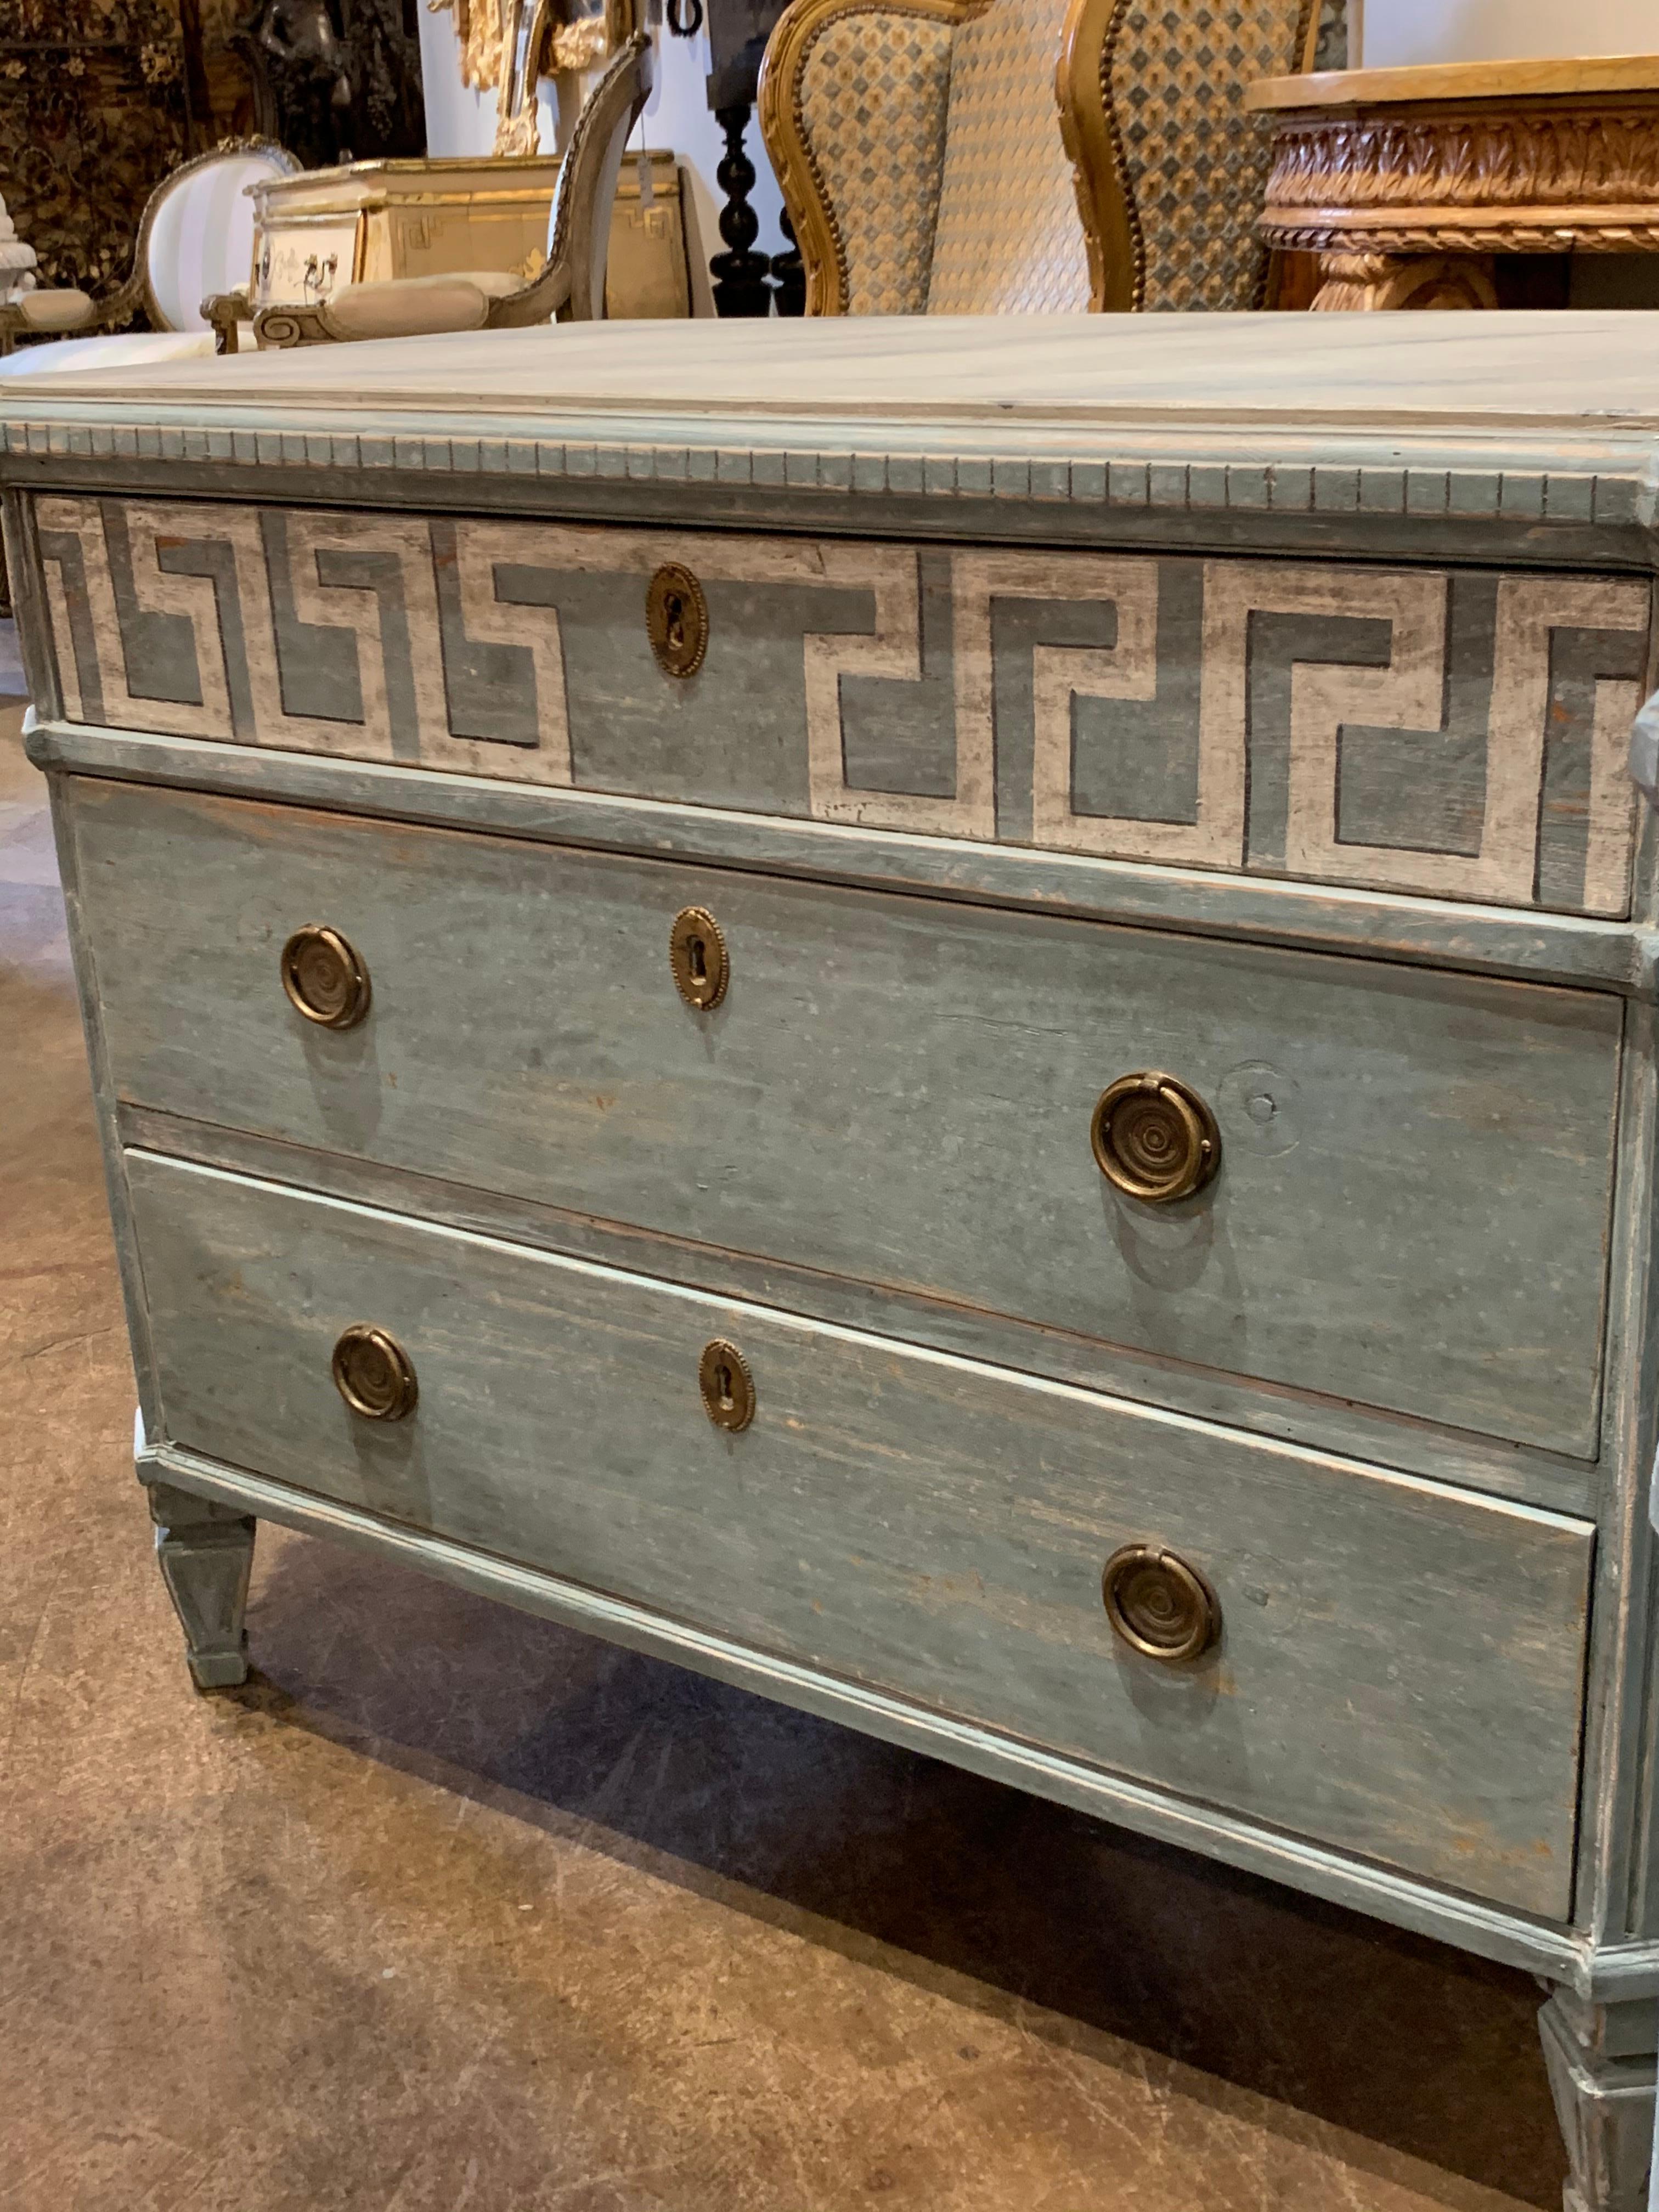 Fabulous pair of 19th century Swedish neoclassical painted chests. Painted in a beautiful blue green color with white Greek key border. And the tops are painted in creme color with grey veining pattern. Each have 3 drawers for storage. A beautiful